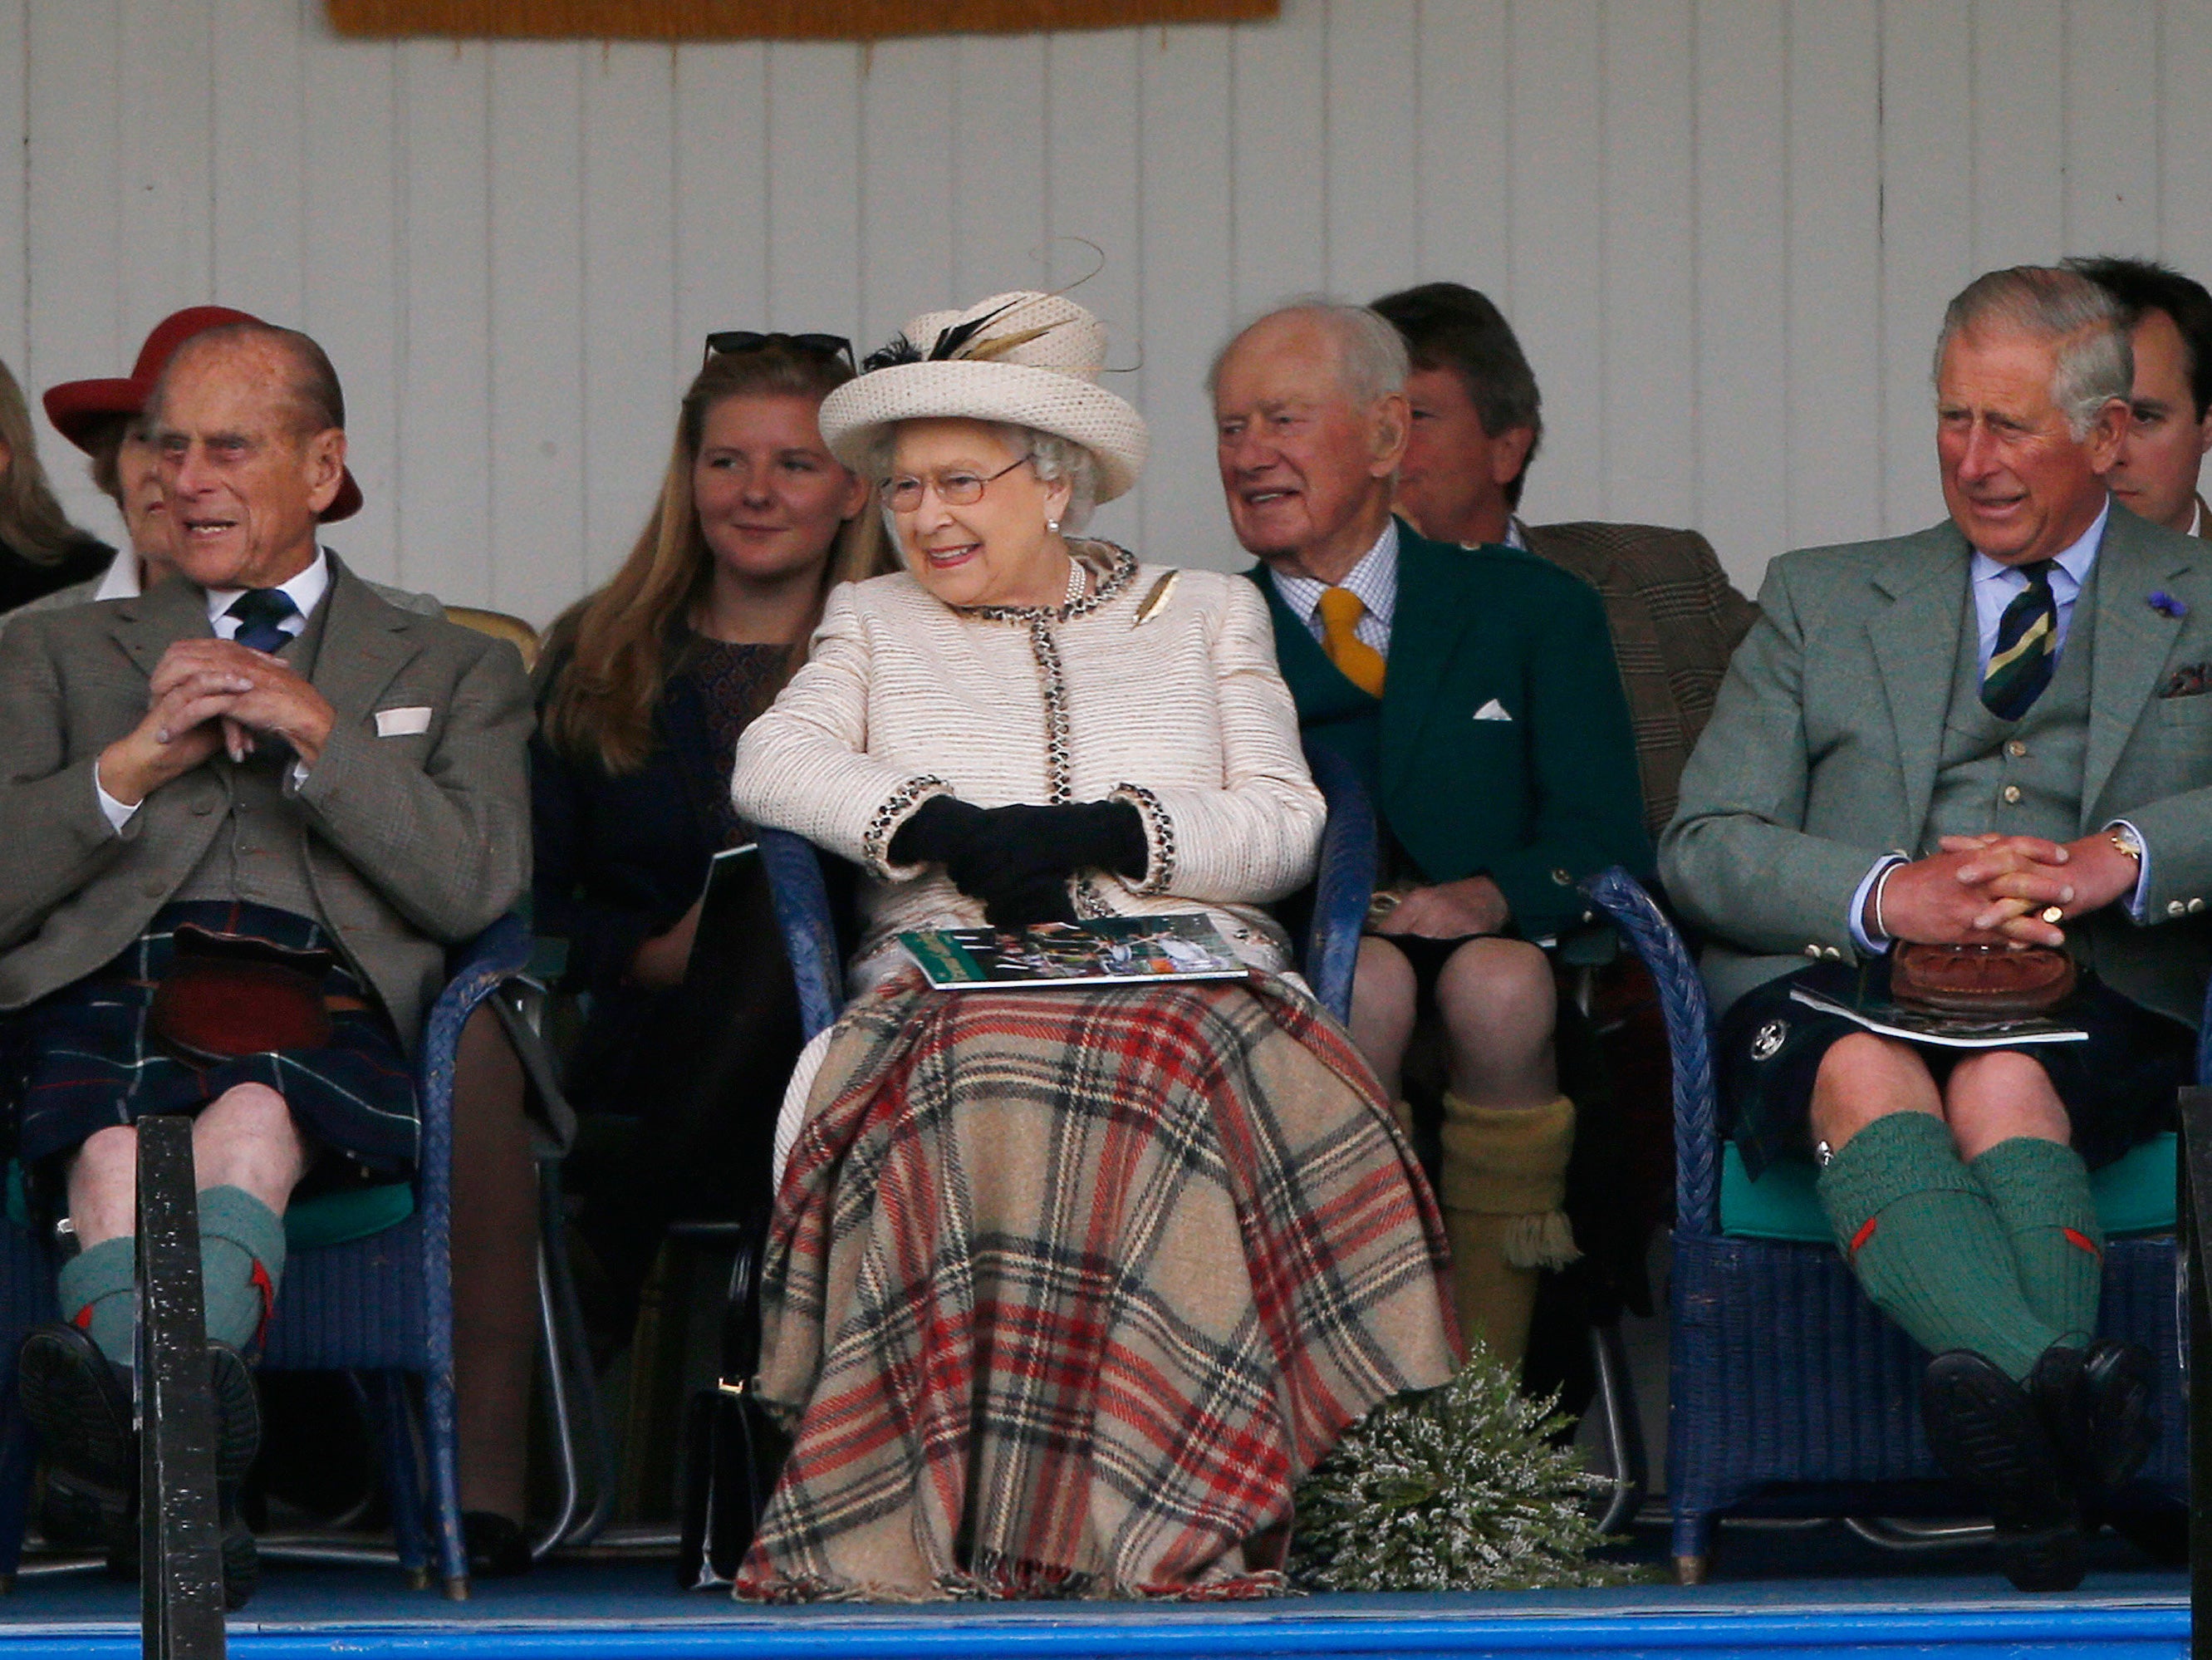 The Queen watches the caber being tossed at the annual Braemar Highland Gathering in Braemar, Scotland, with Prince Philip and Prince Charles, earlier in September